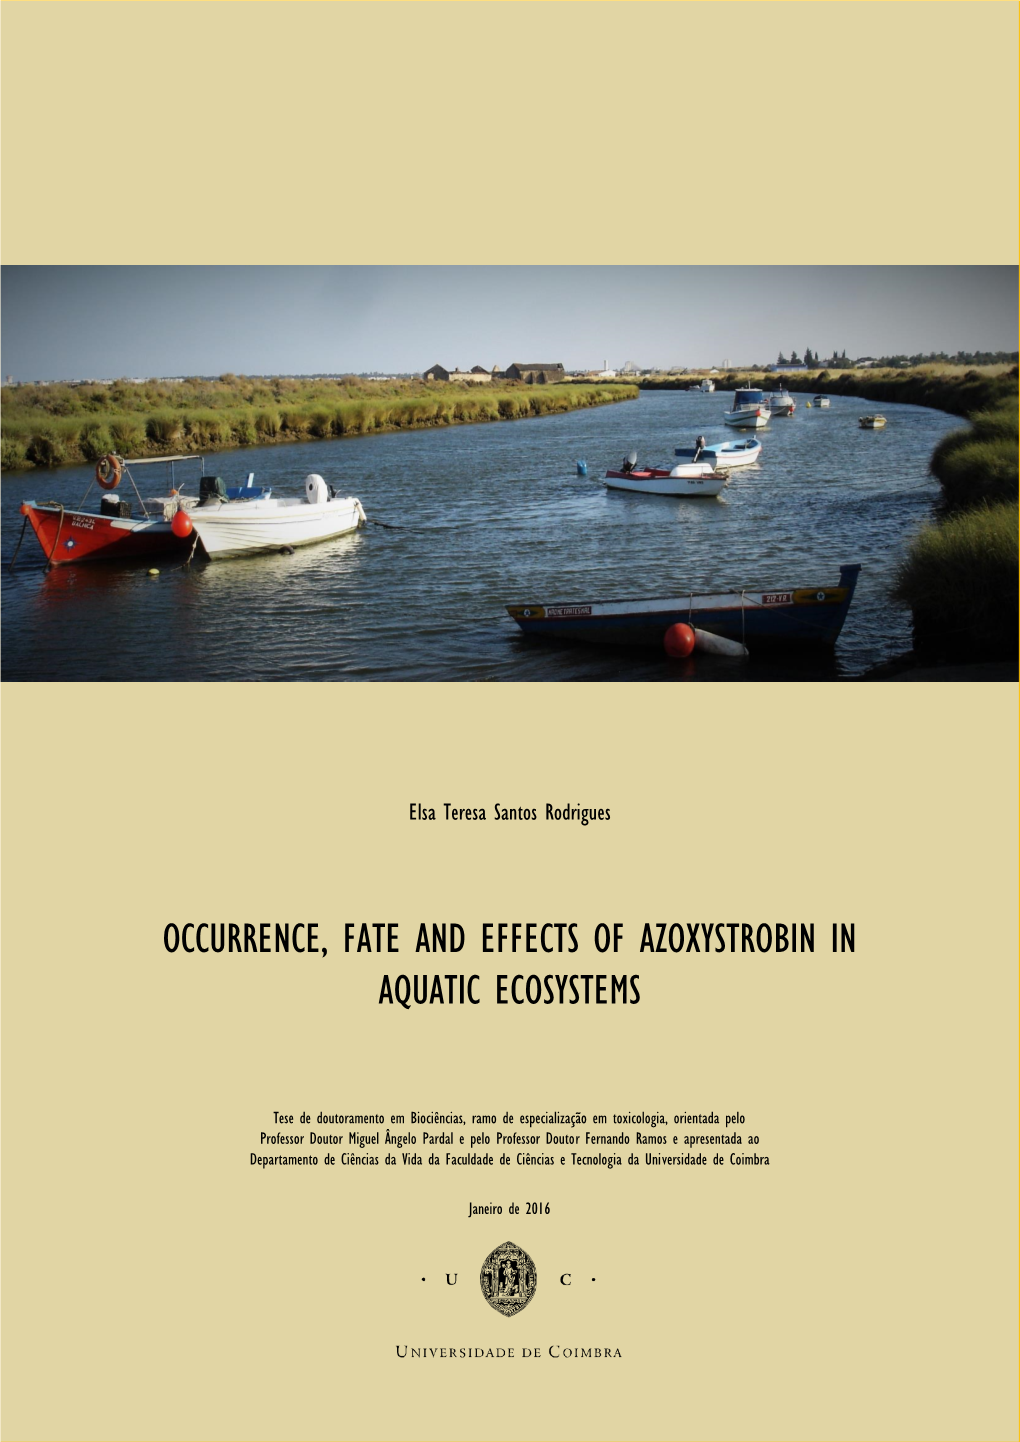 Occurrence, Fate and Effects of Azoxystrobin in Aquatic Ecosystems